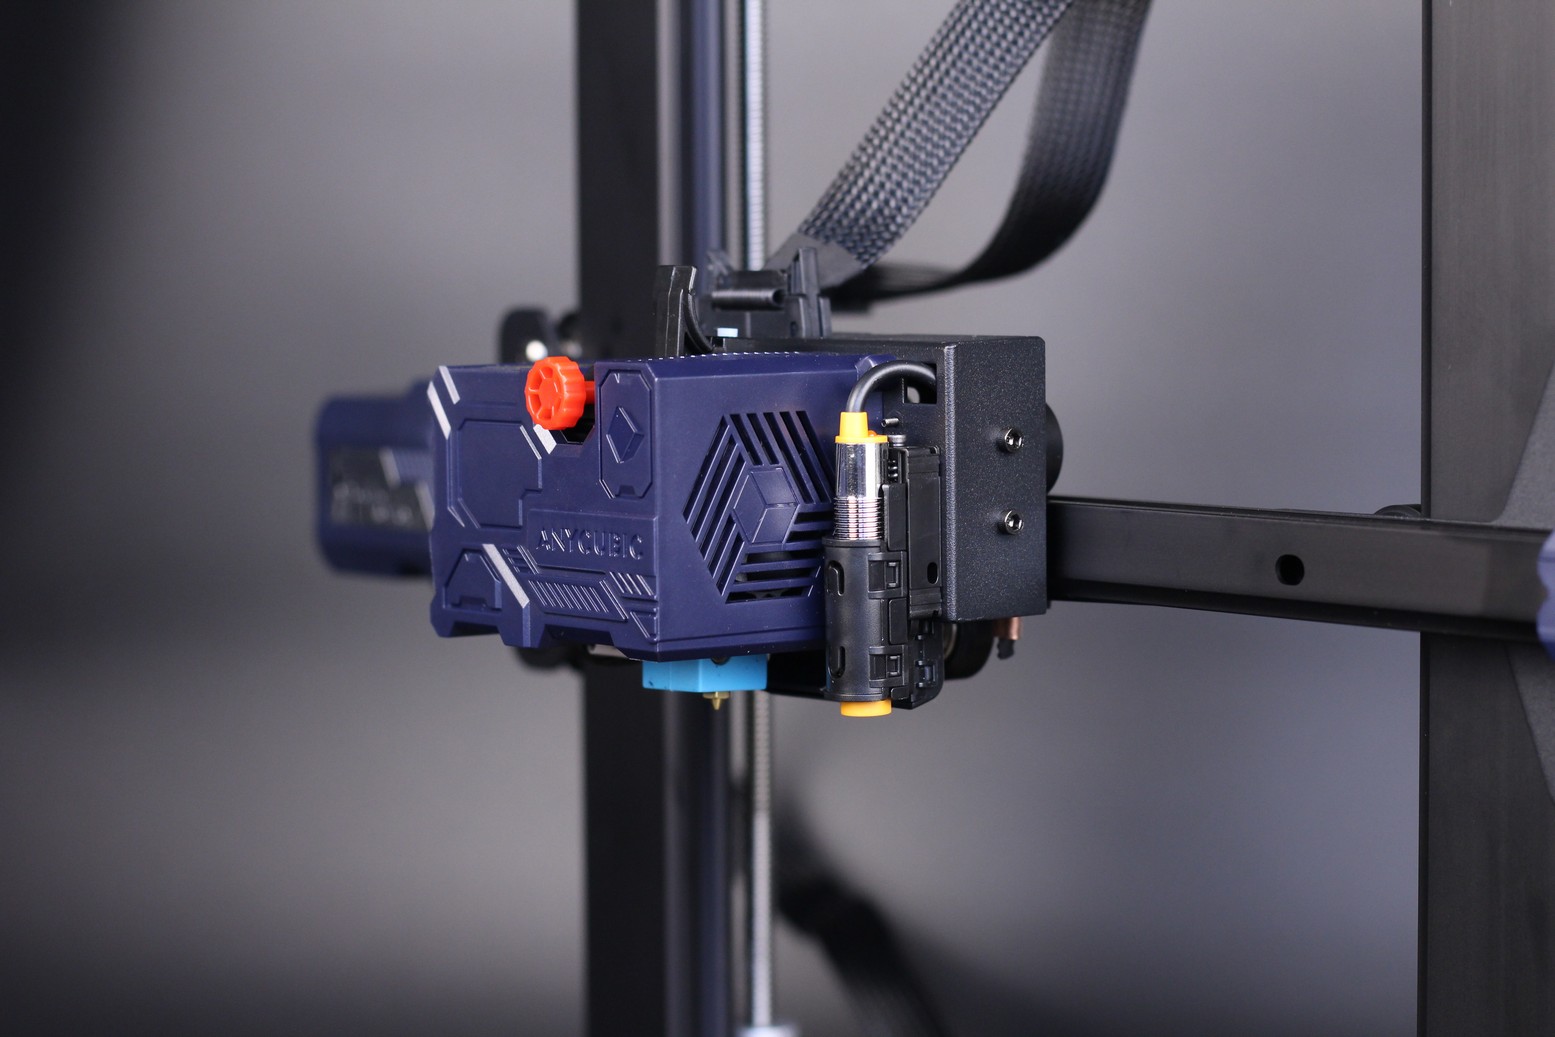 Anycubic Kobra Direct Drive Extruder 2 | Anycubic Kobra Review: The New Budget Standard